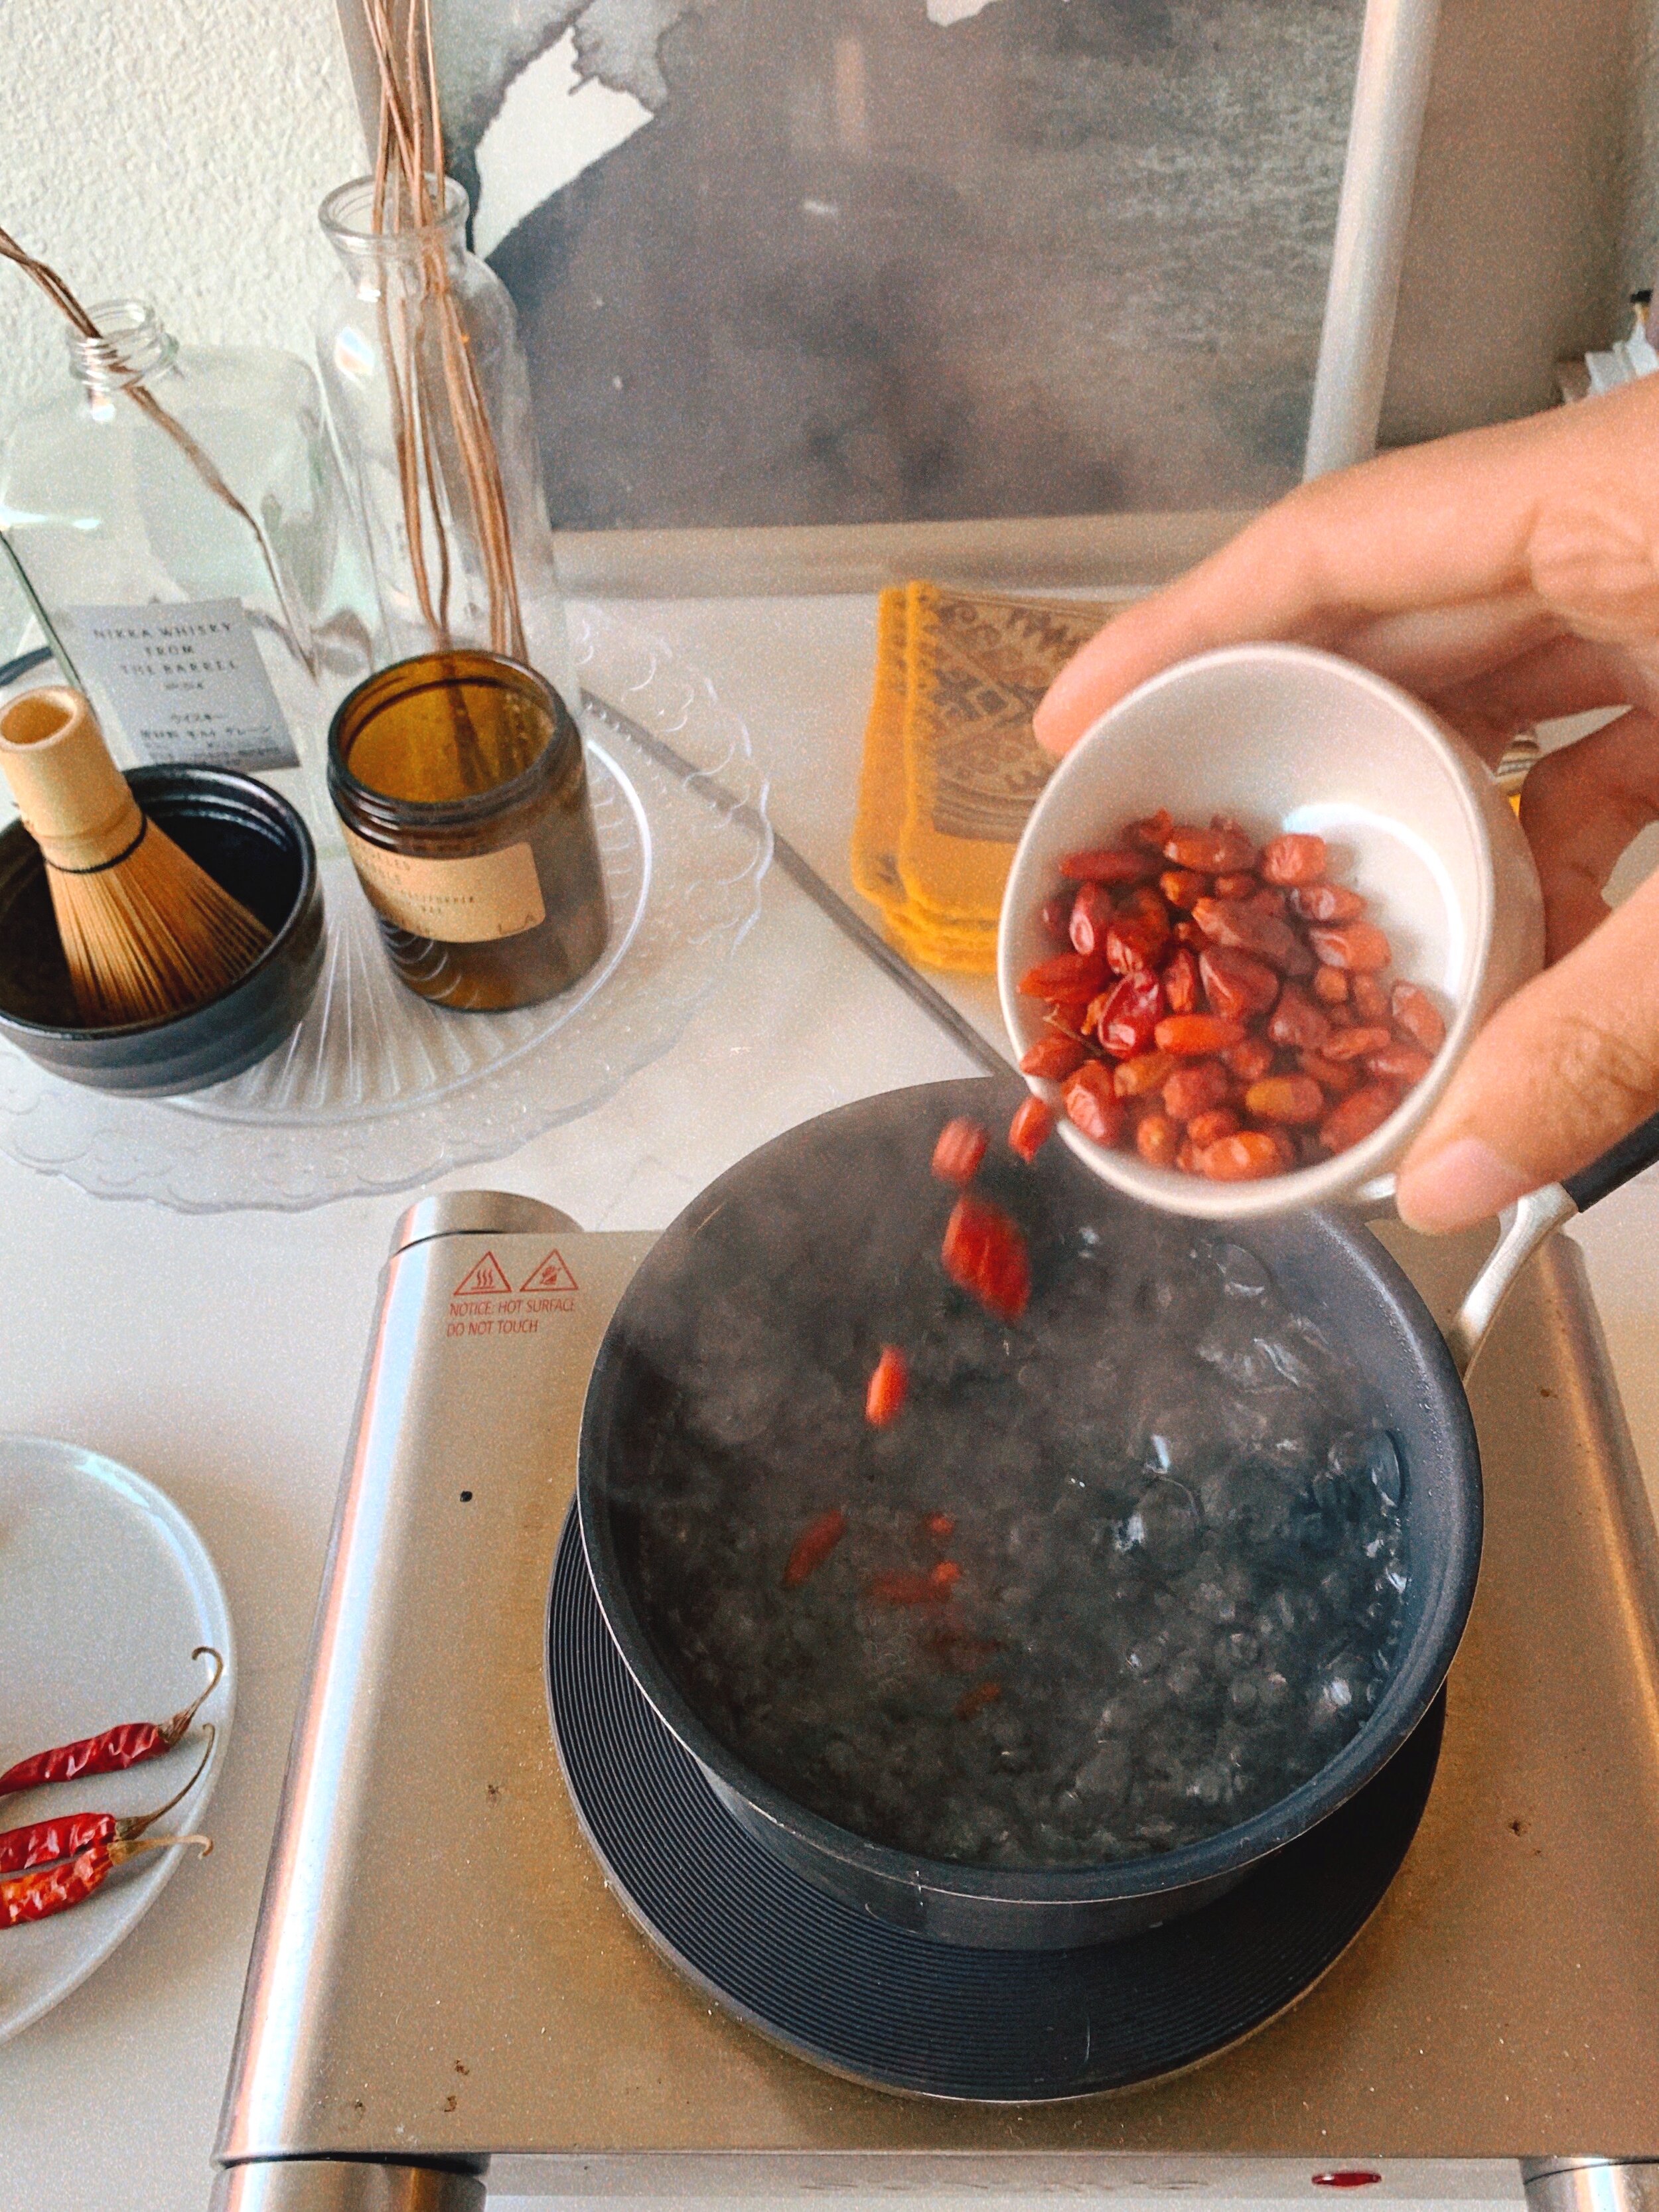 Dried chilies going into the pot of boiling water